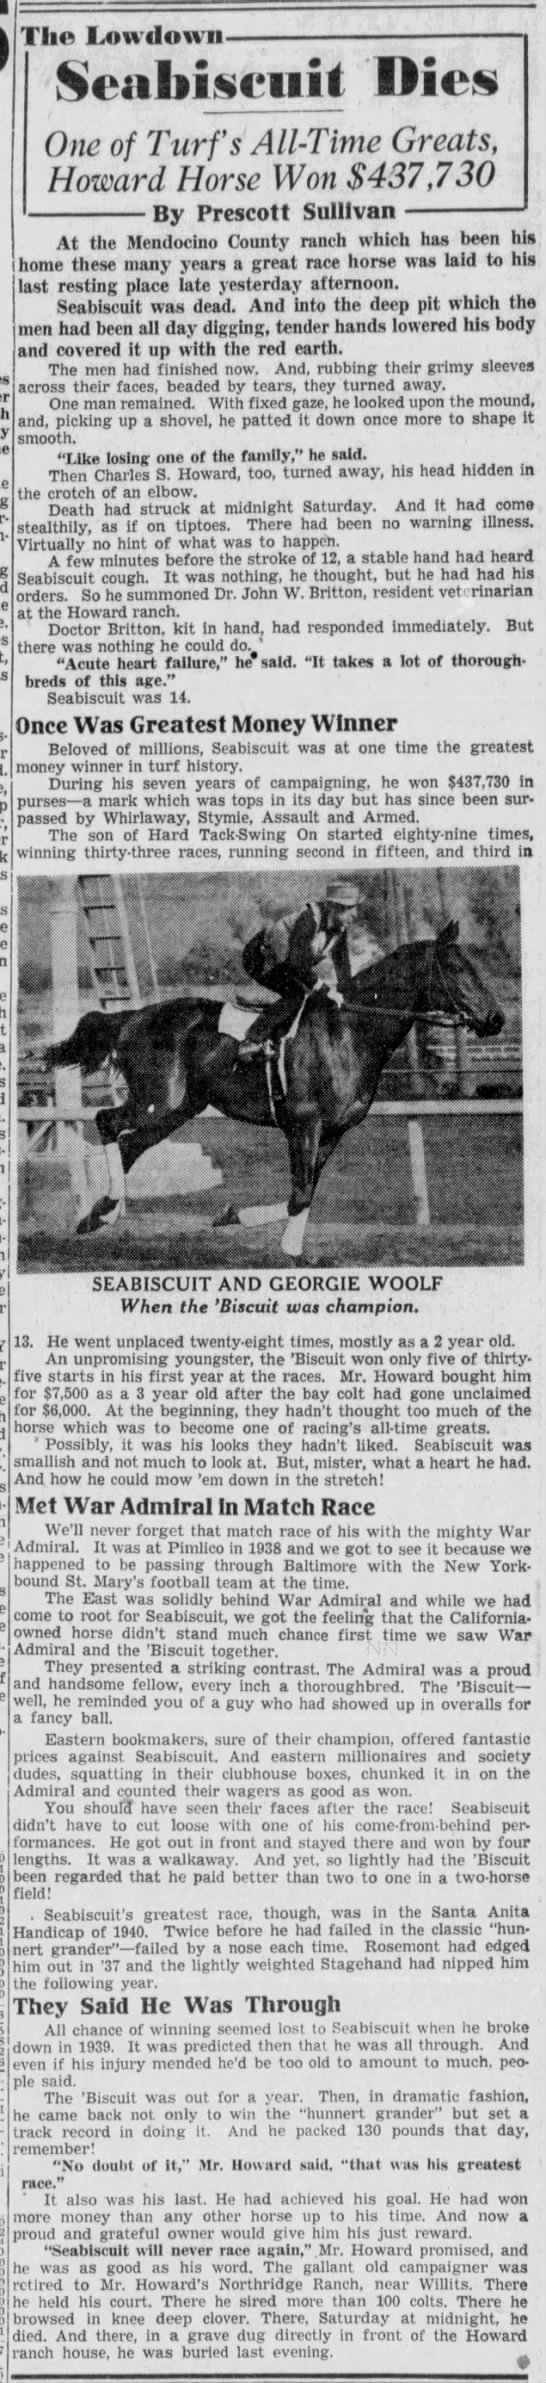 1947 obituary for Seabiscuit, "one of turf's all-time greats" - 